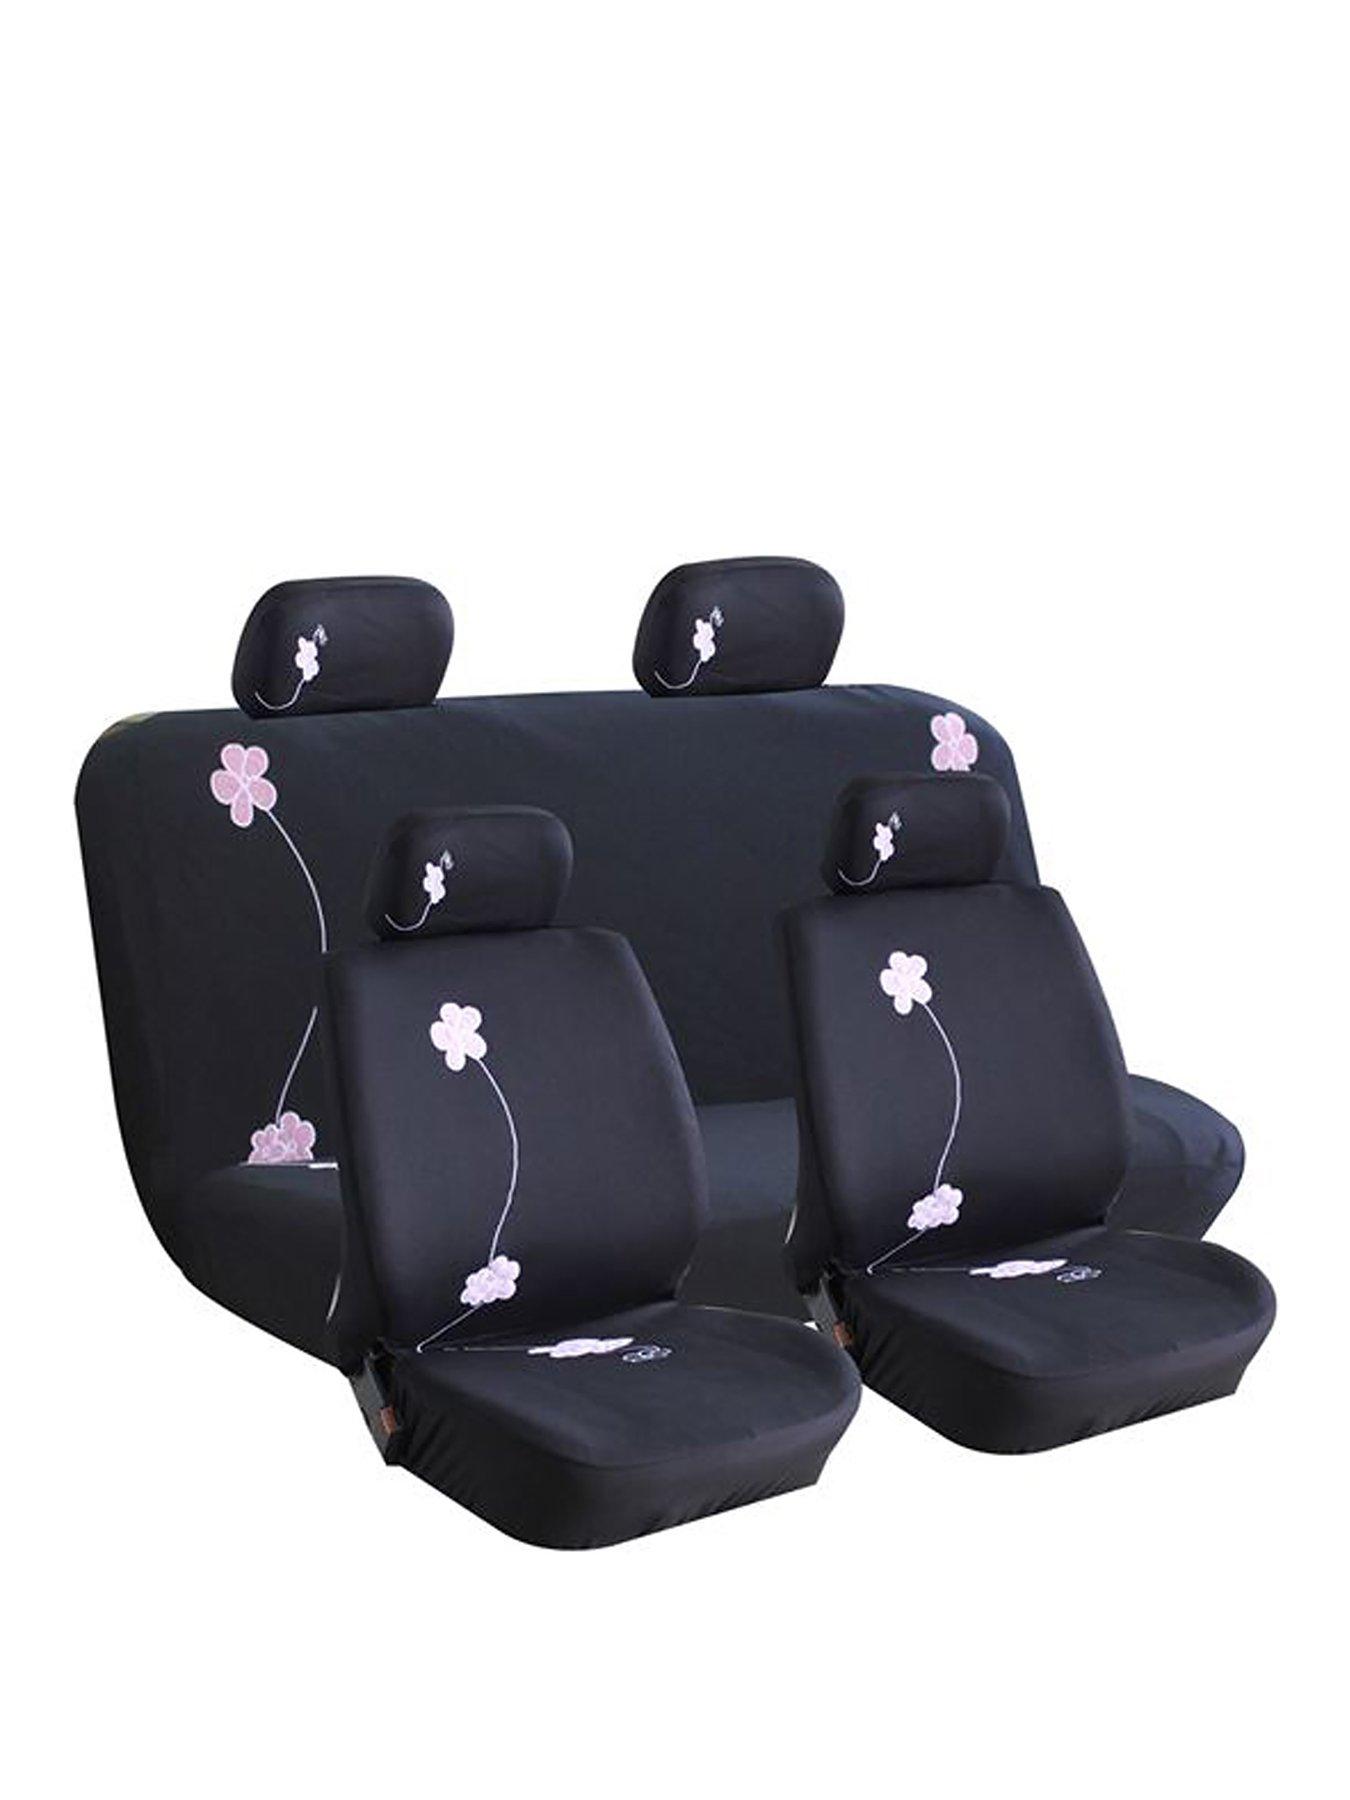 Streetwize Accessories Bloom Seat Covers Very Co Uk